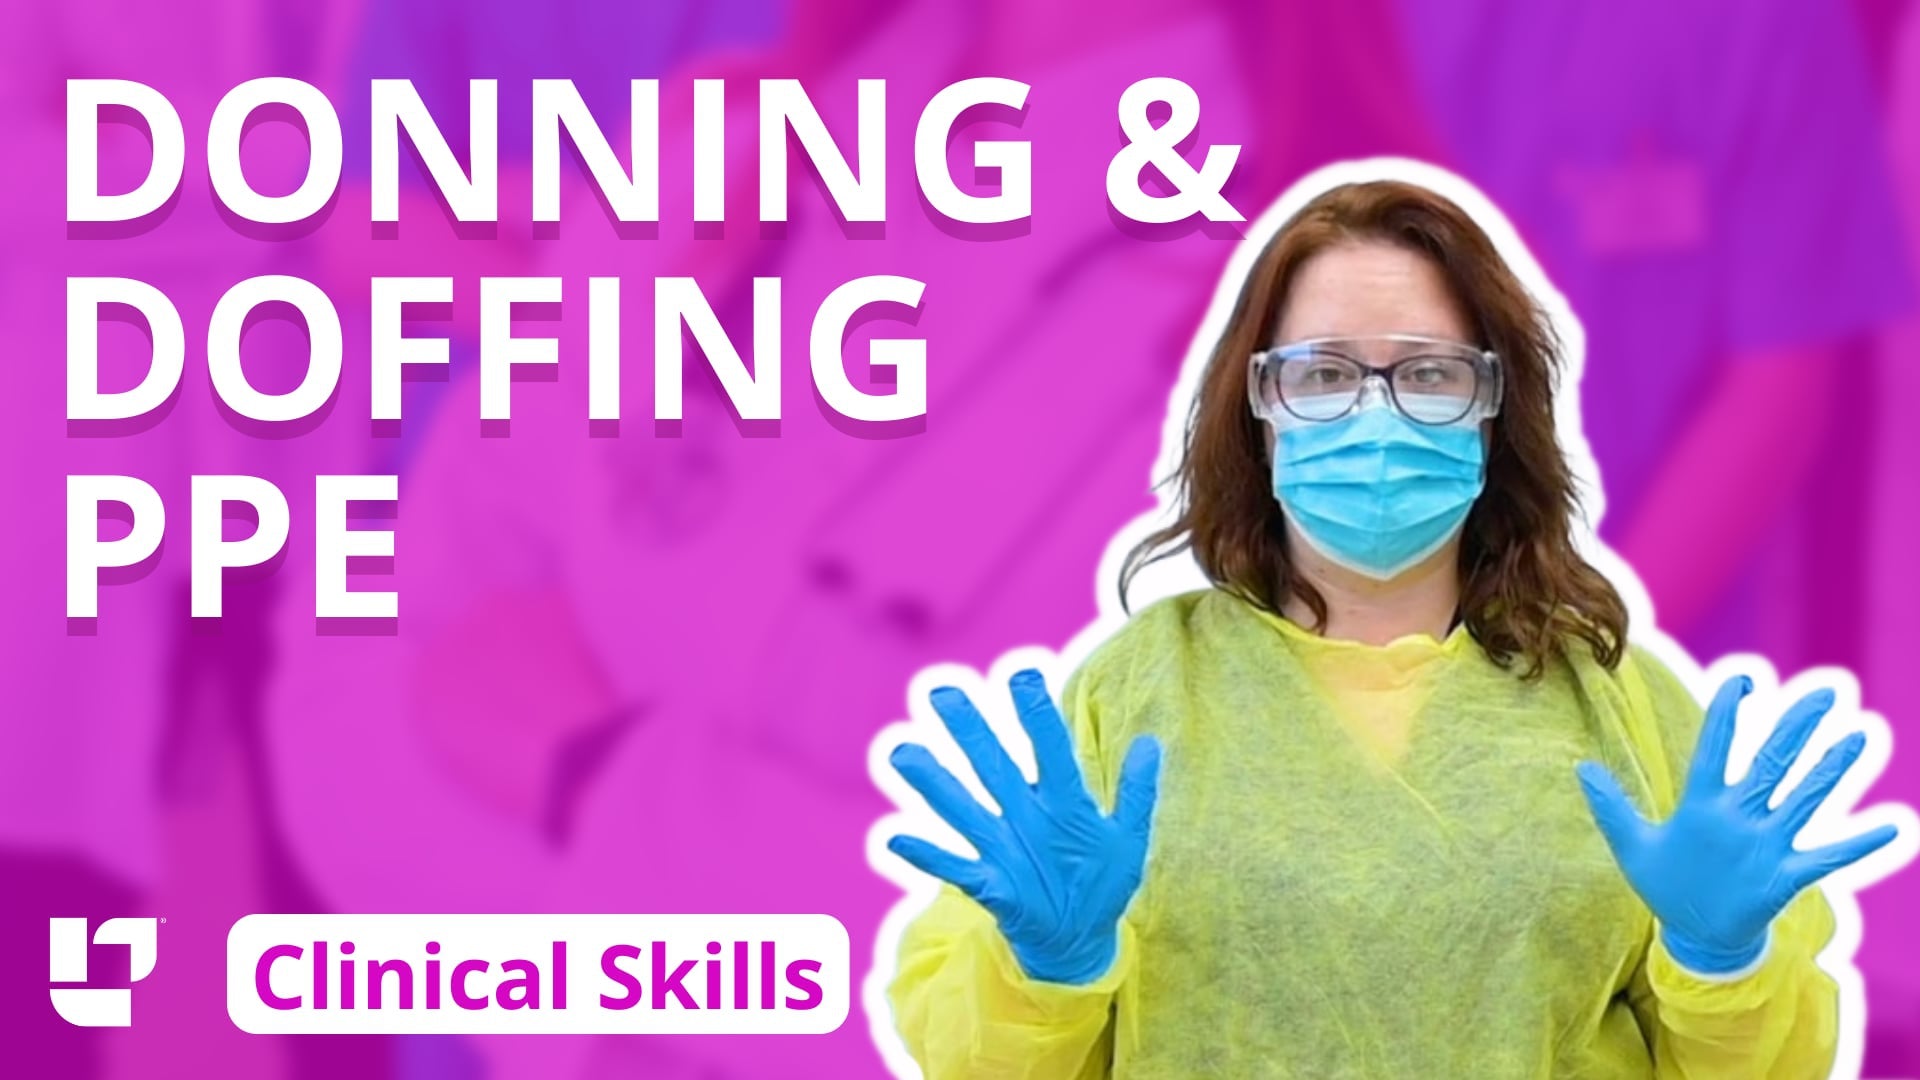 Clinical Skills - Donning and Doffing PPE - LevelUpRN